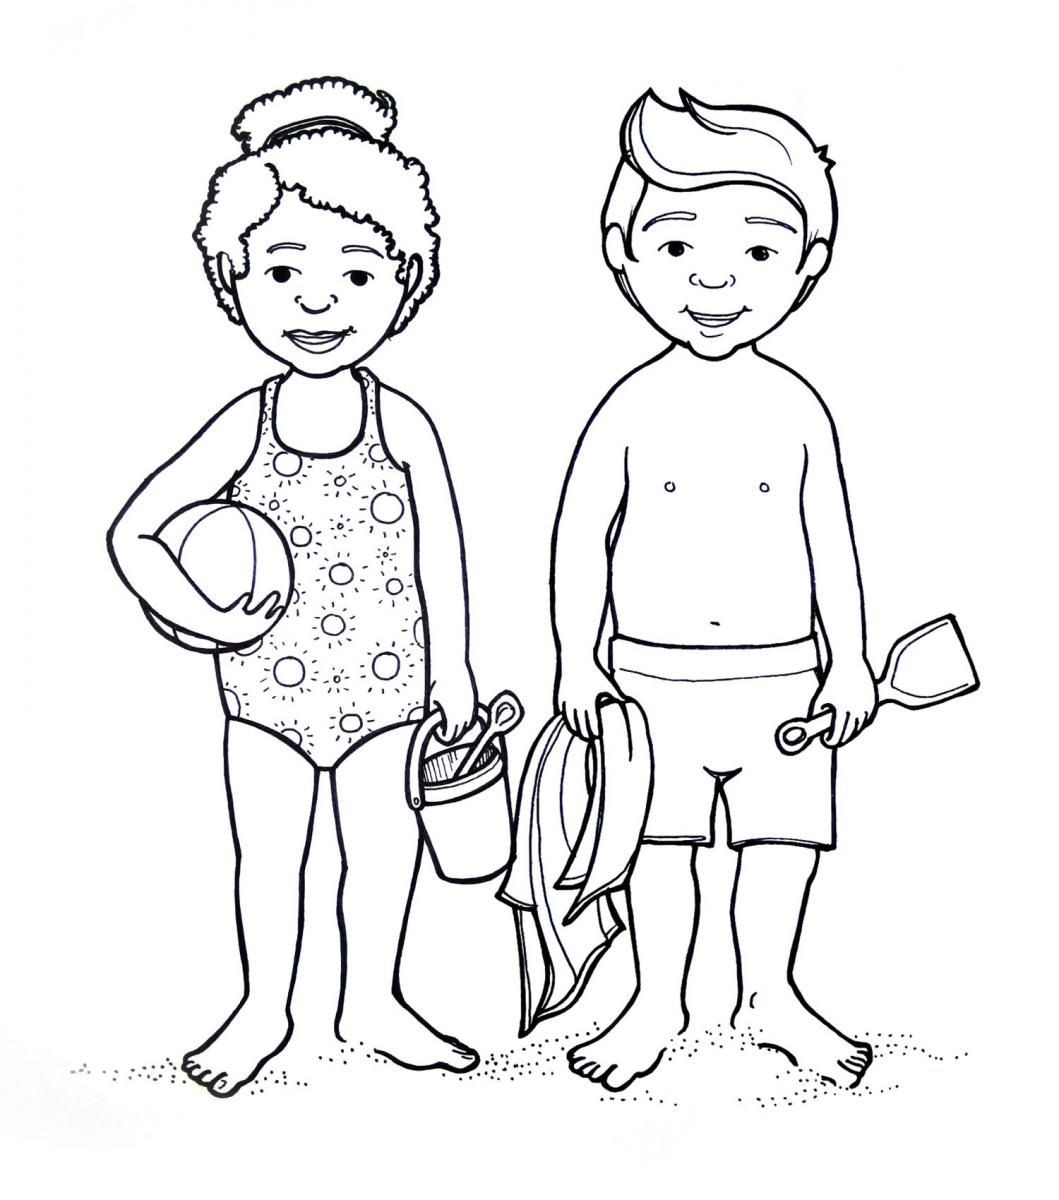 Coloring Sheets For Boys Age 5
 Body Parts For Kids Coloring Pages Coloring Home